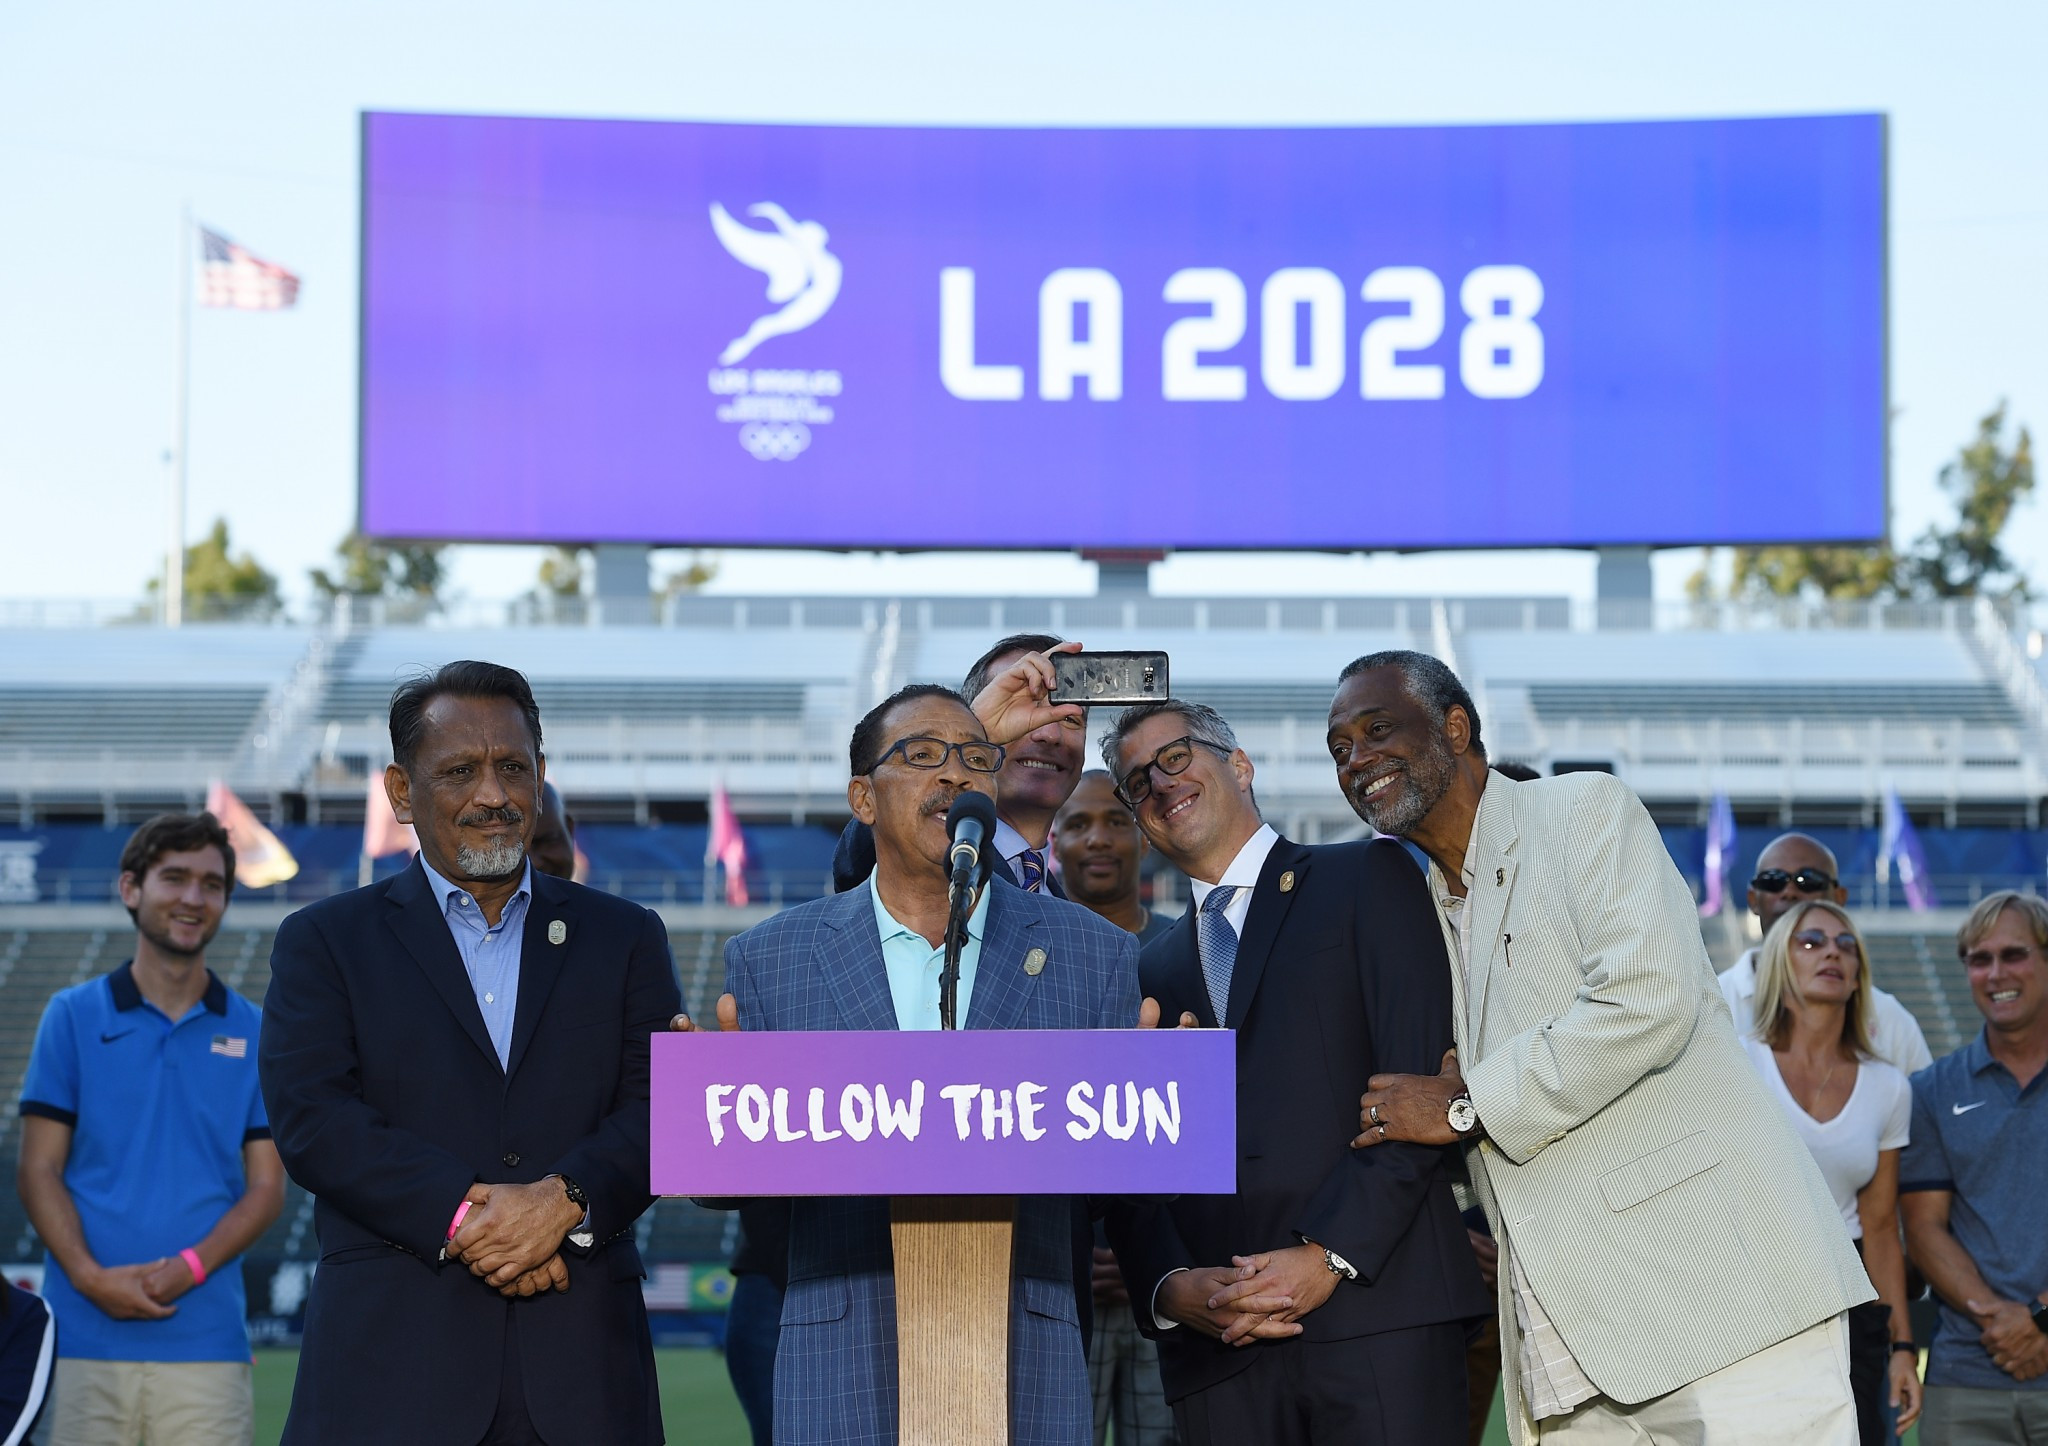 It was confirmed announced that Los Angeles had agreed a deal to host the 2028 Olympic and Paralympic Games ©Getty Images